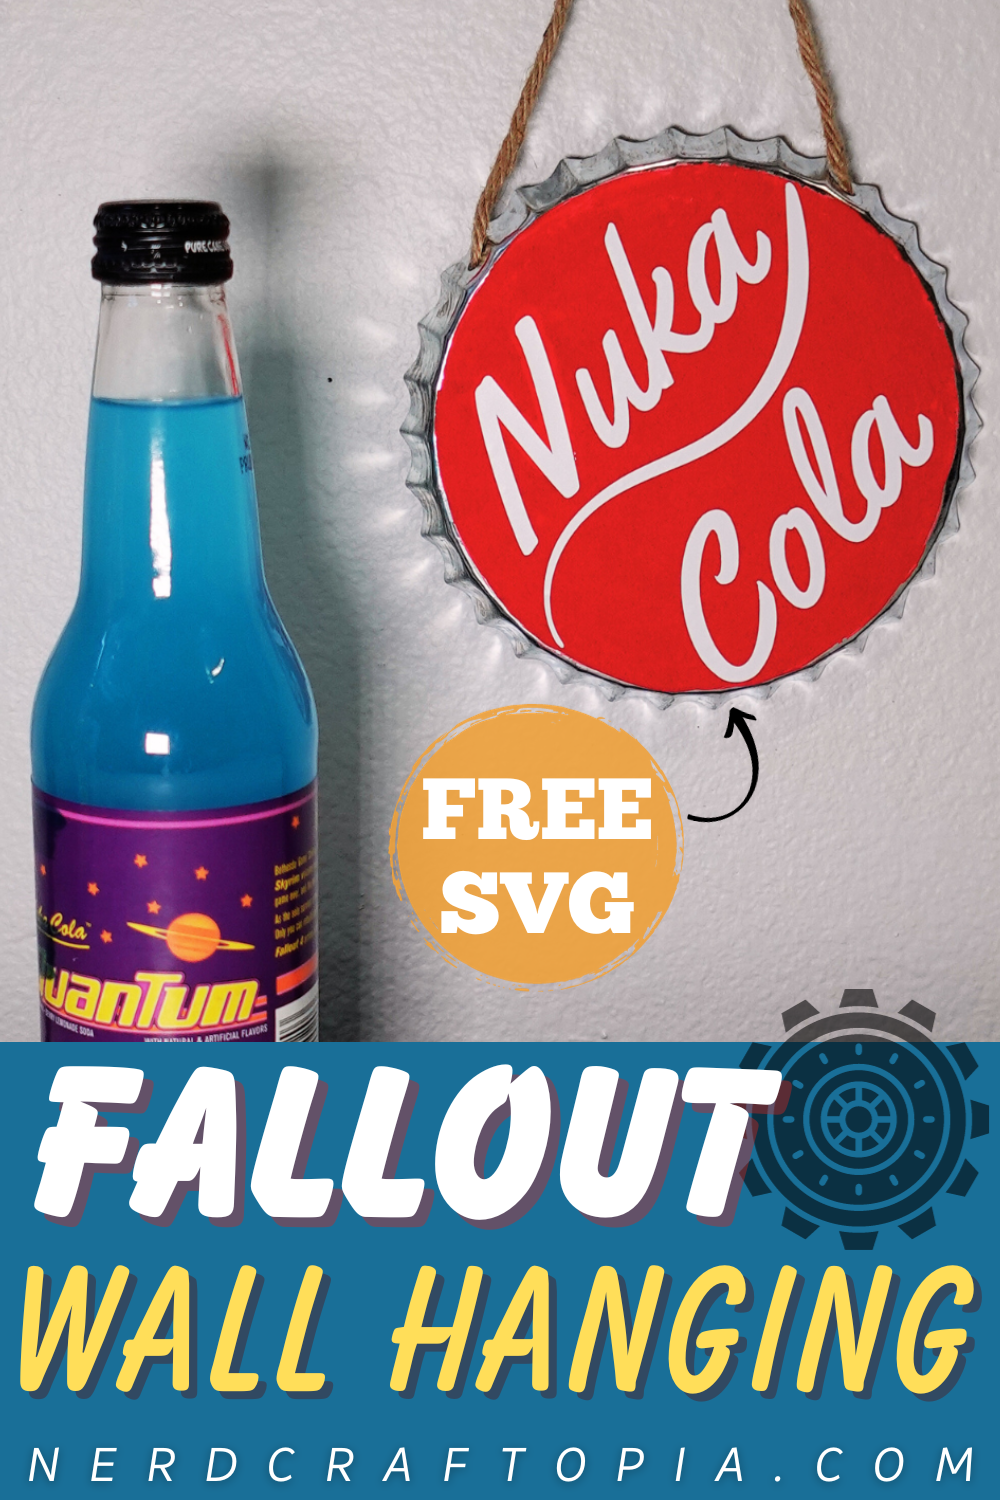 free fallout SVG file for fallout wall hanging decor